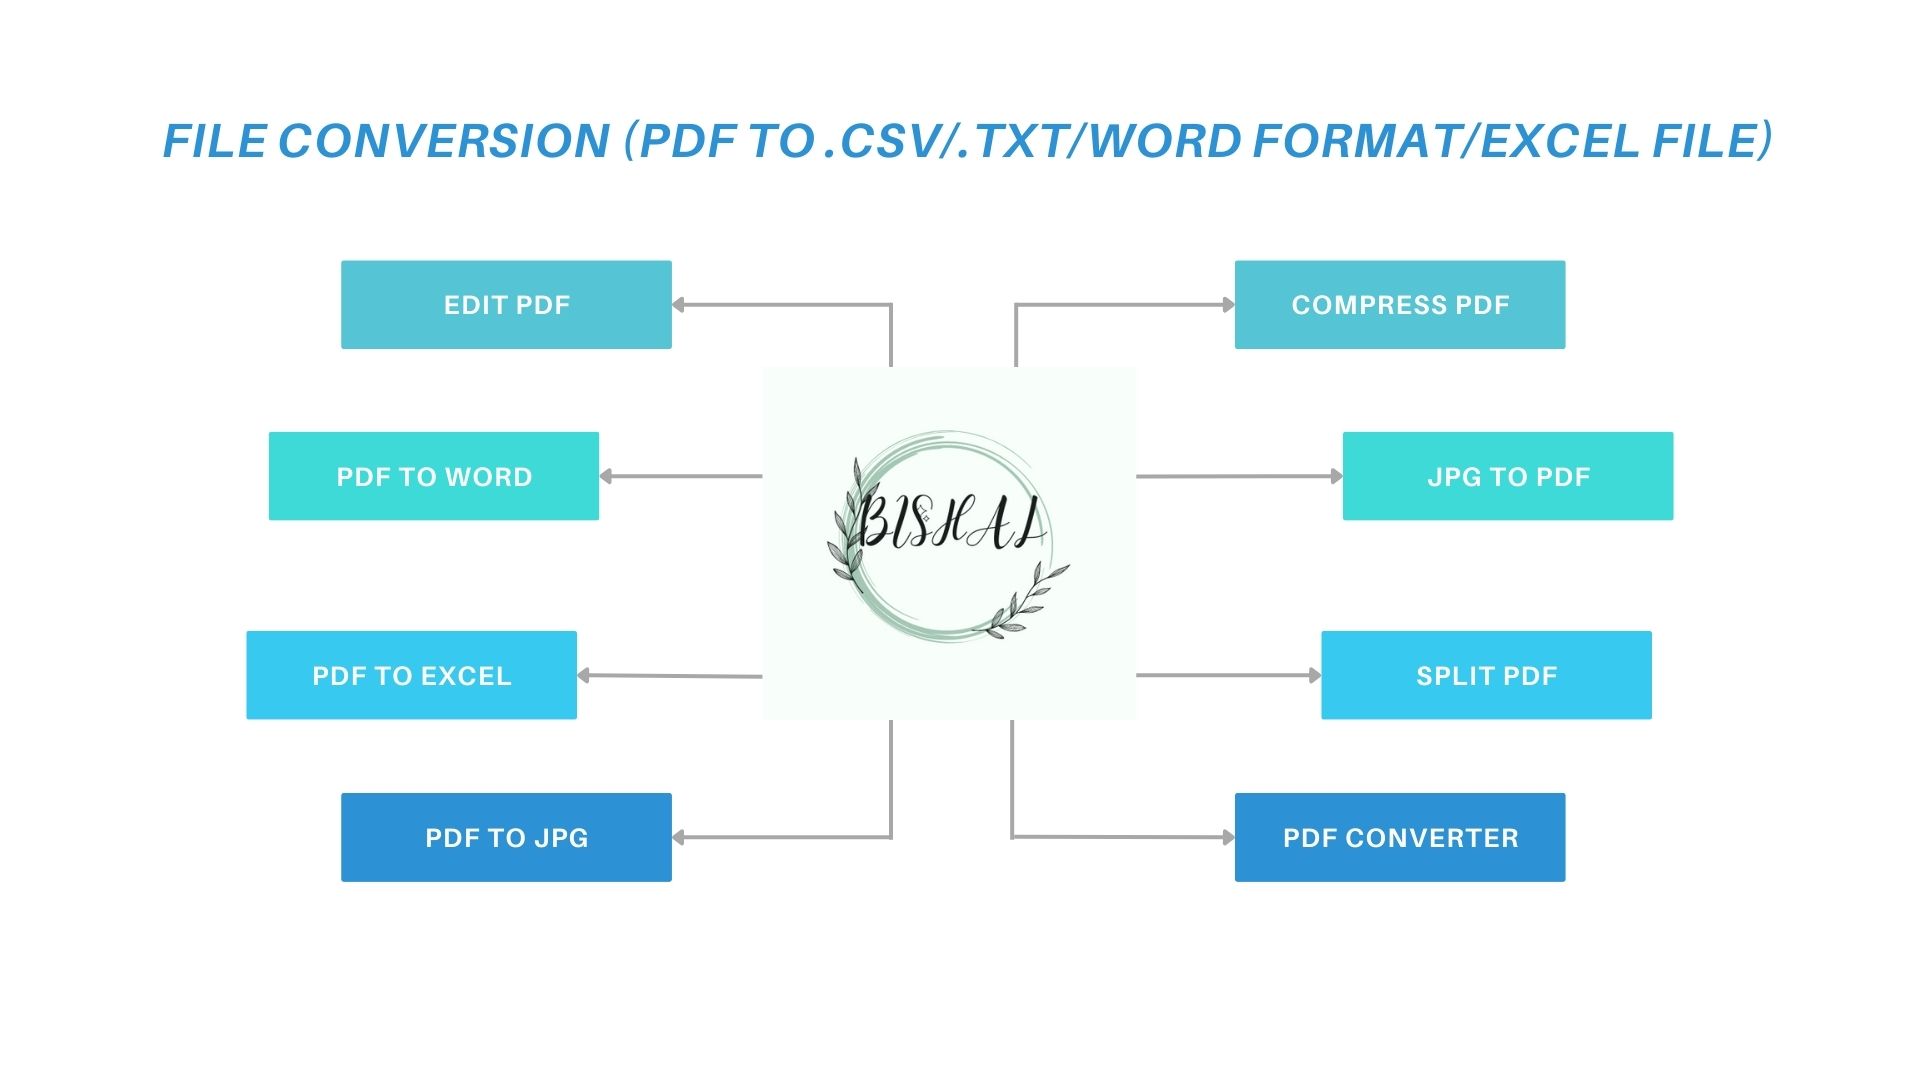 I WILL HELP YOU CONVERT PDF TO VARIOUS FORMAT